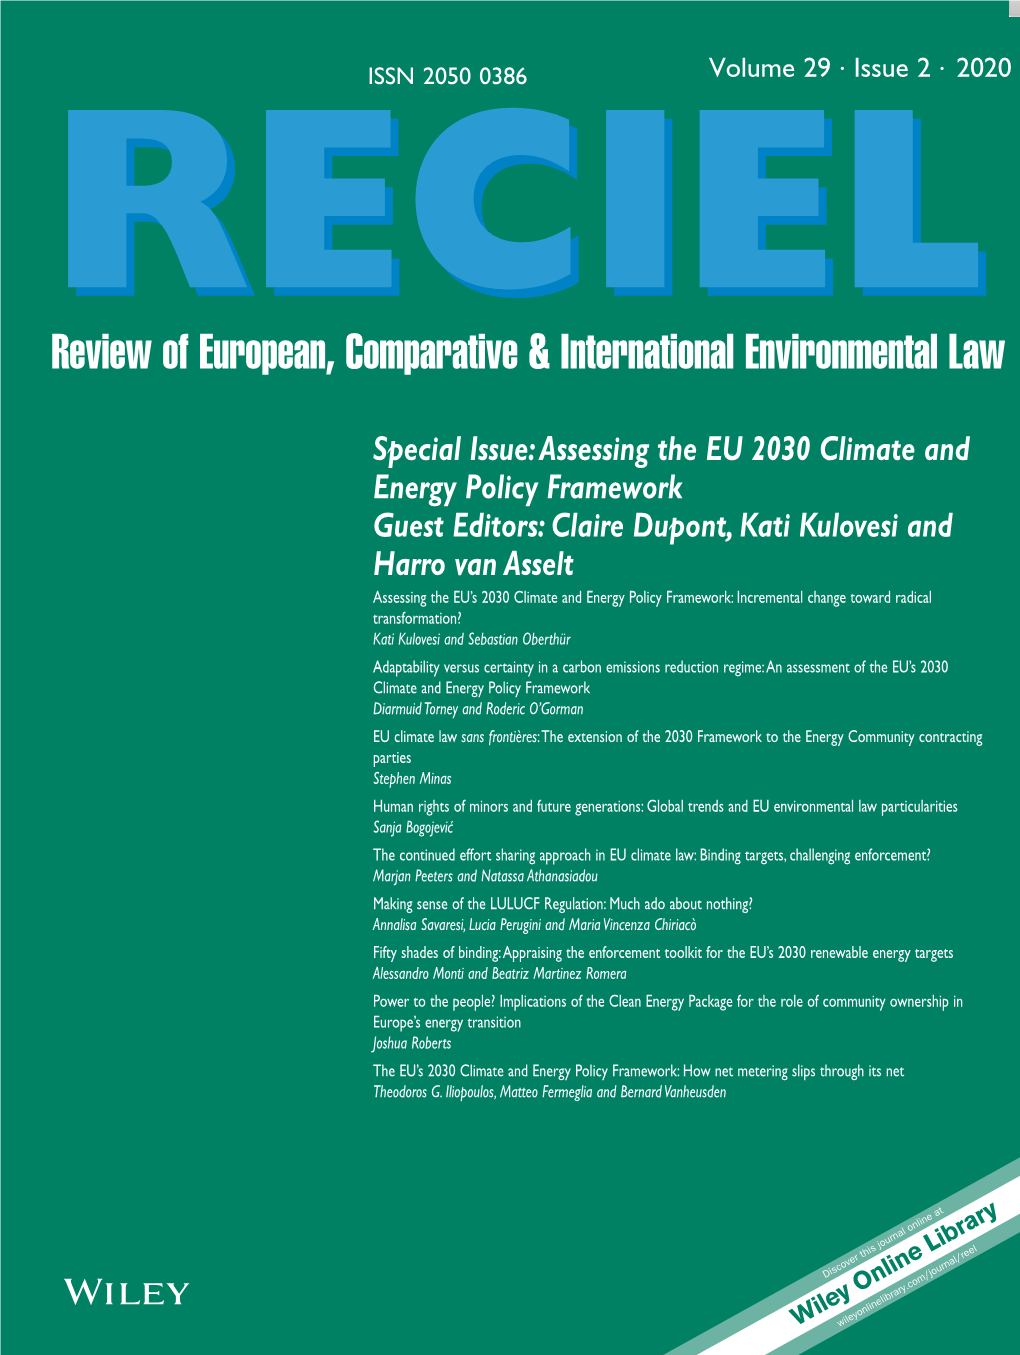 Review of European, Comparative and International